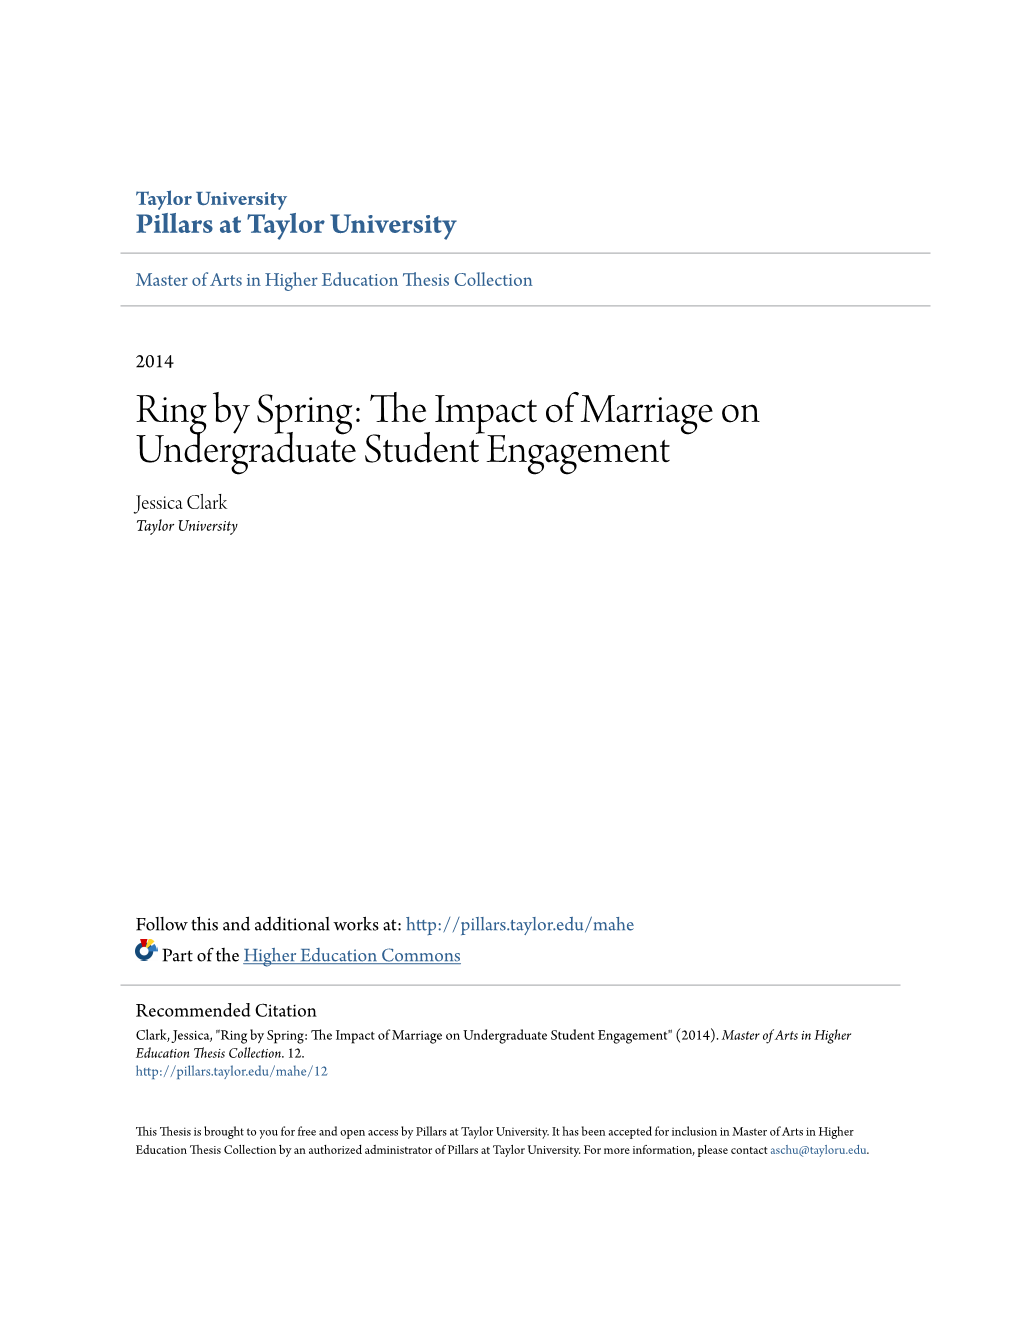 The Impact of Marriage on Undergraduate Student Engagement